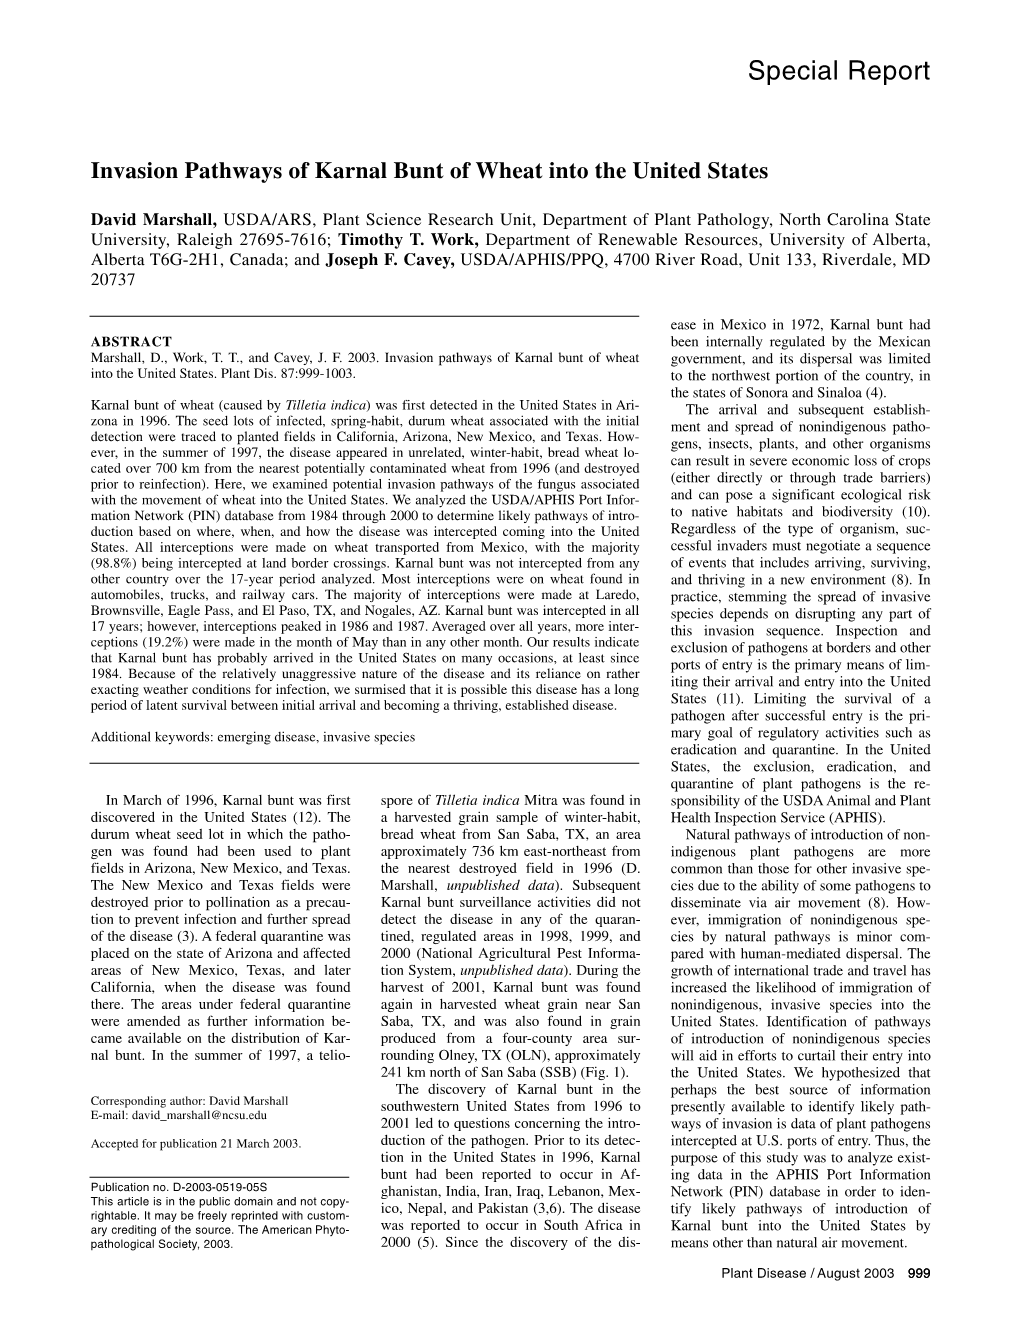 Invasion Pathways of Karnal Bunt of Wheat Into the United States